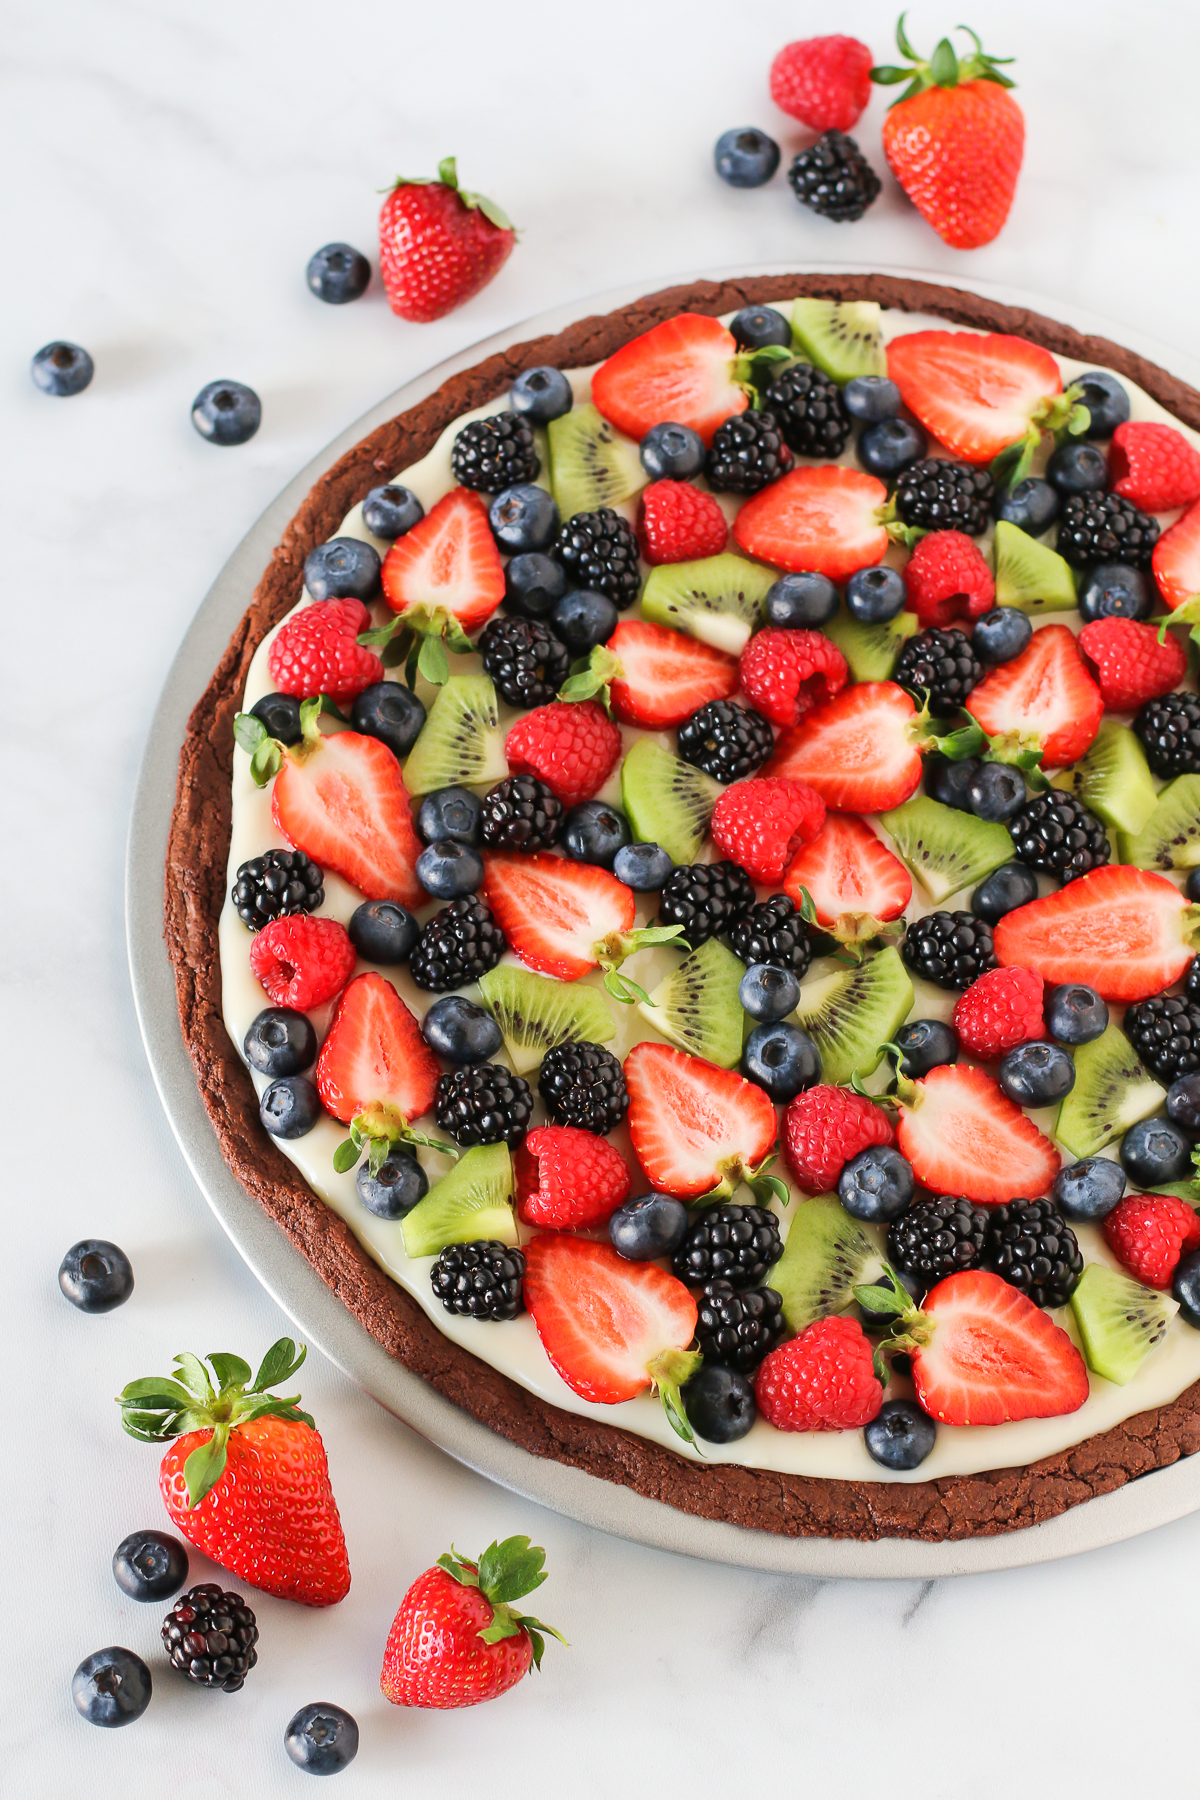 Gluten Free Vegan Brownie Fruit Pizza. Chocolate brownie crust with a cream cheese frosting, loaded with fresh fruit. A beautiful dessert pizza!